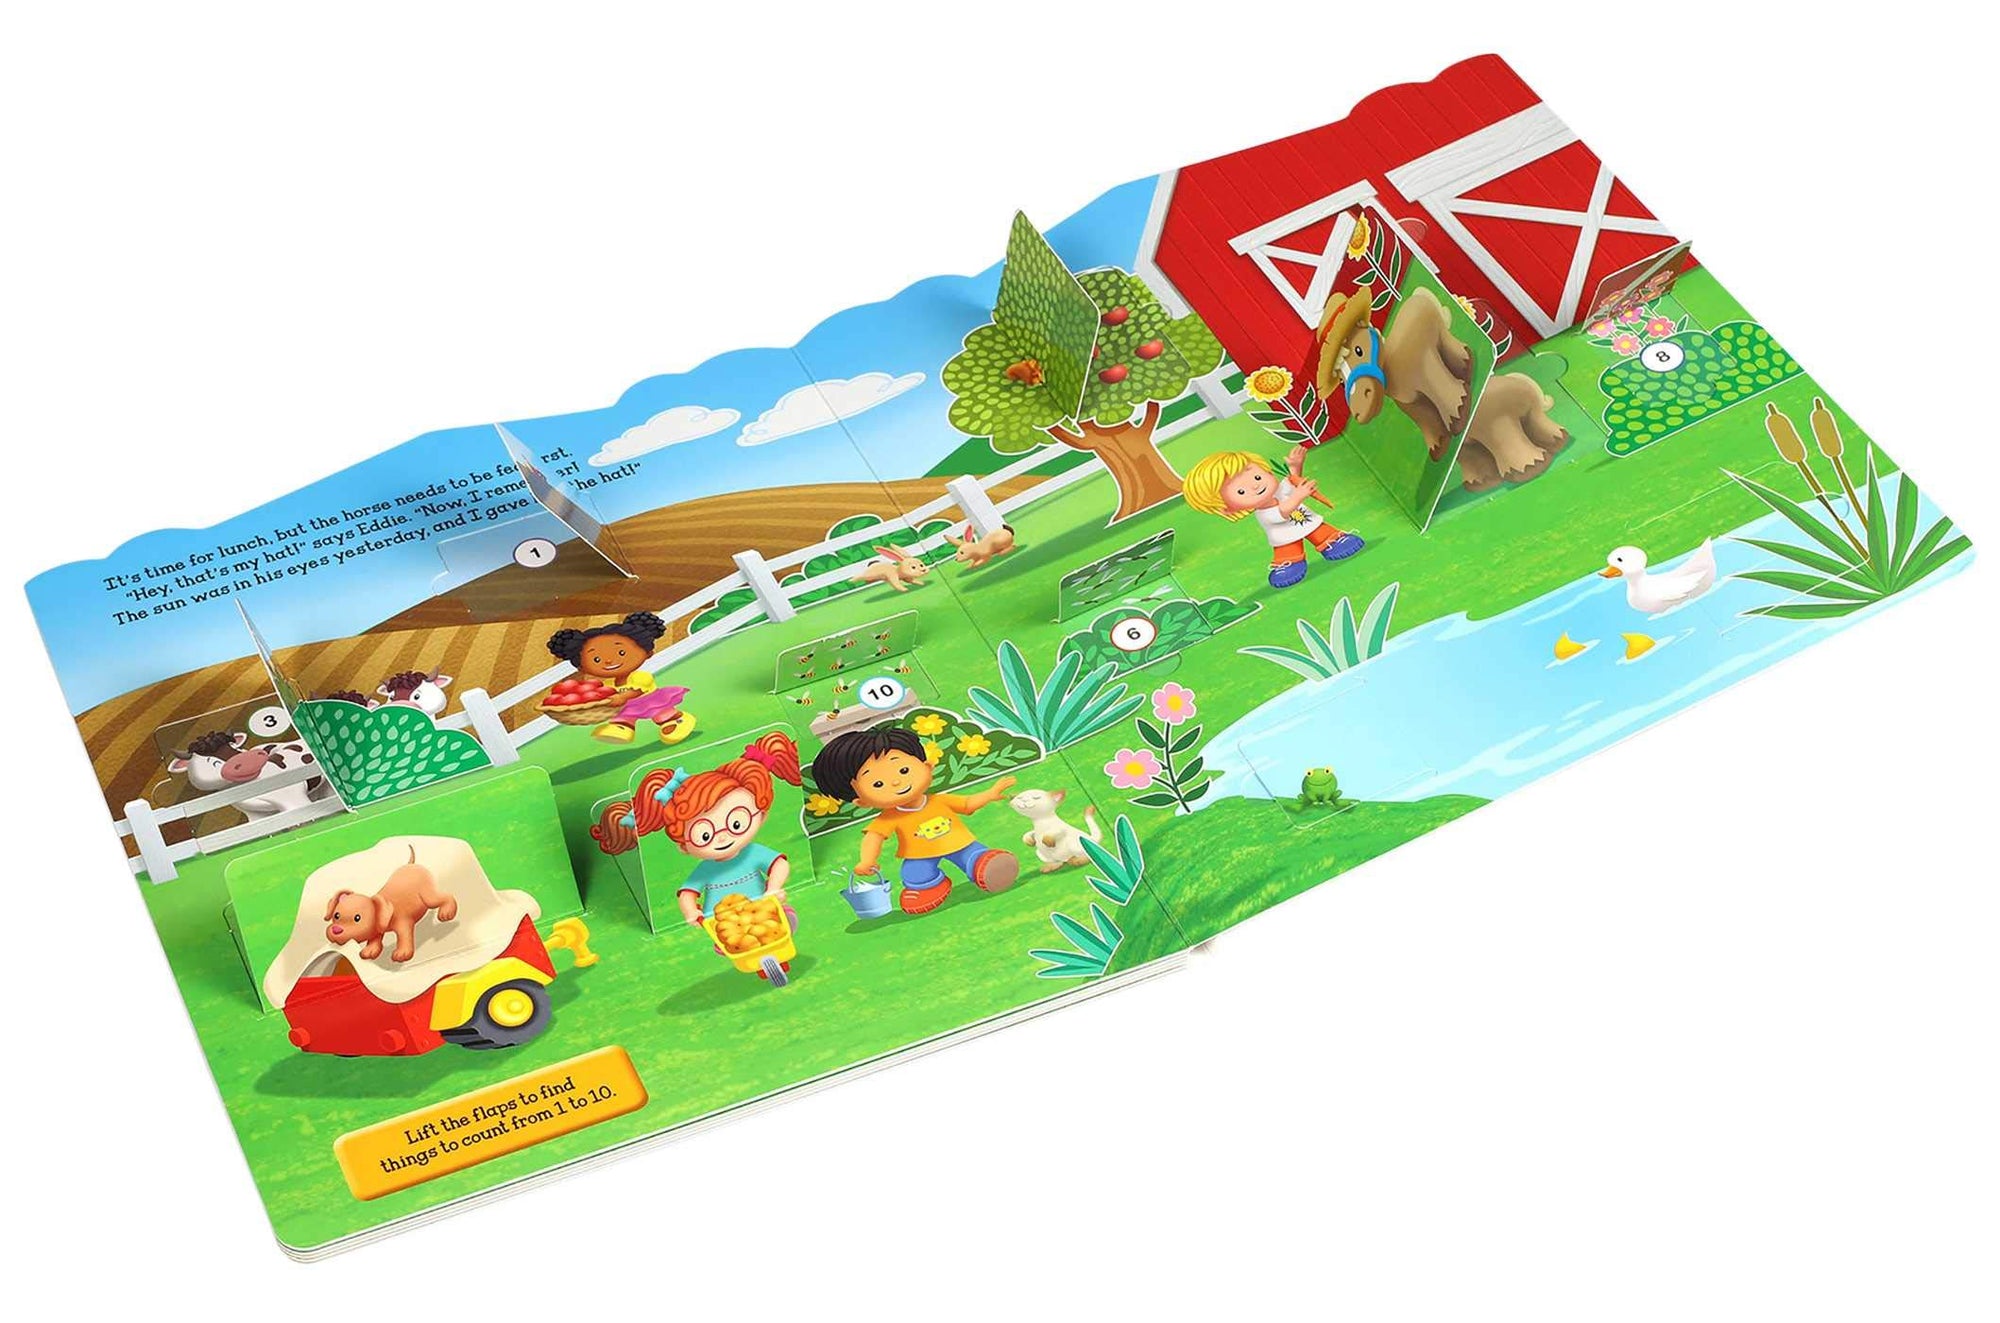 Fisher-Price Little People On the Farm